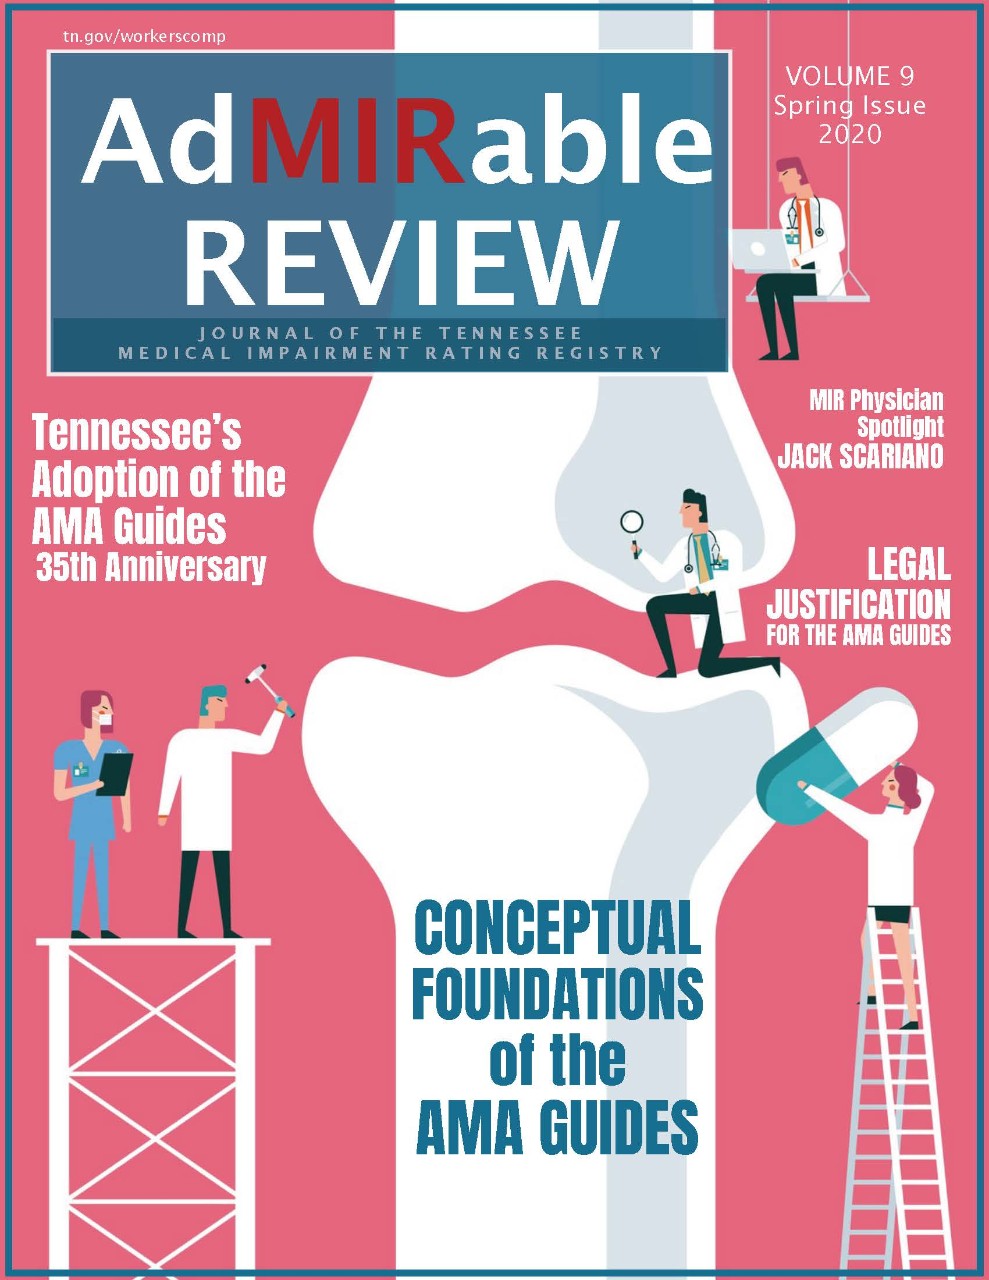 Cover image to the Spring 2020 AdMIRable Review issue